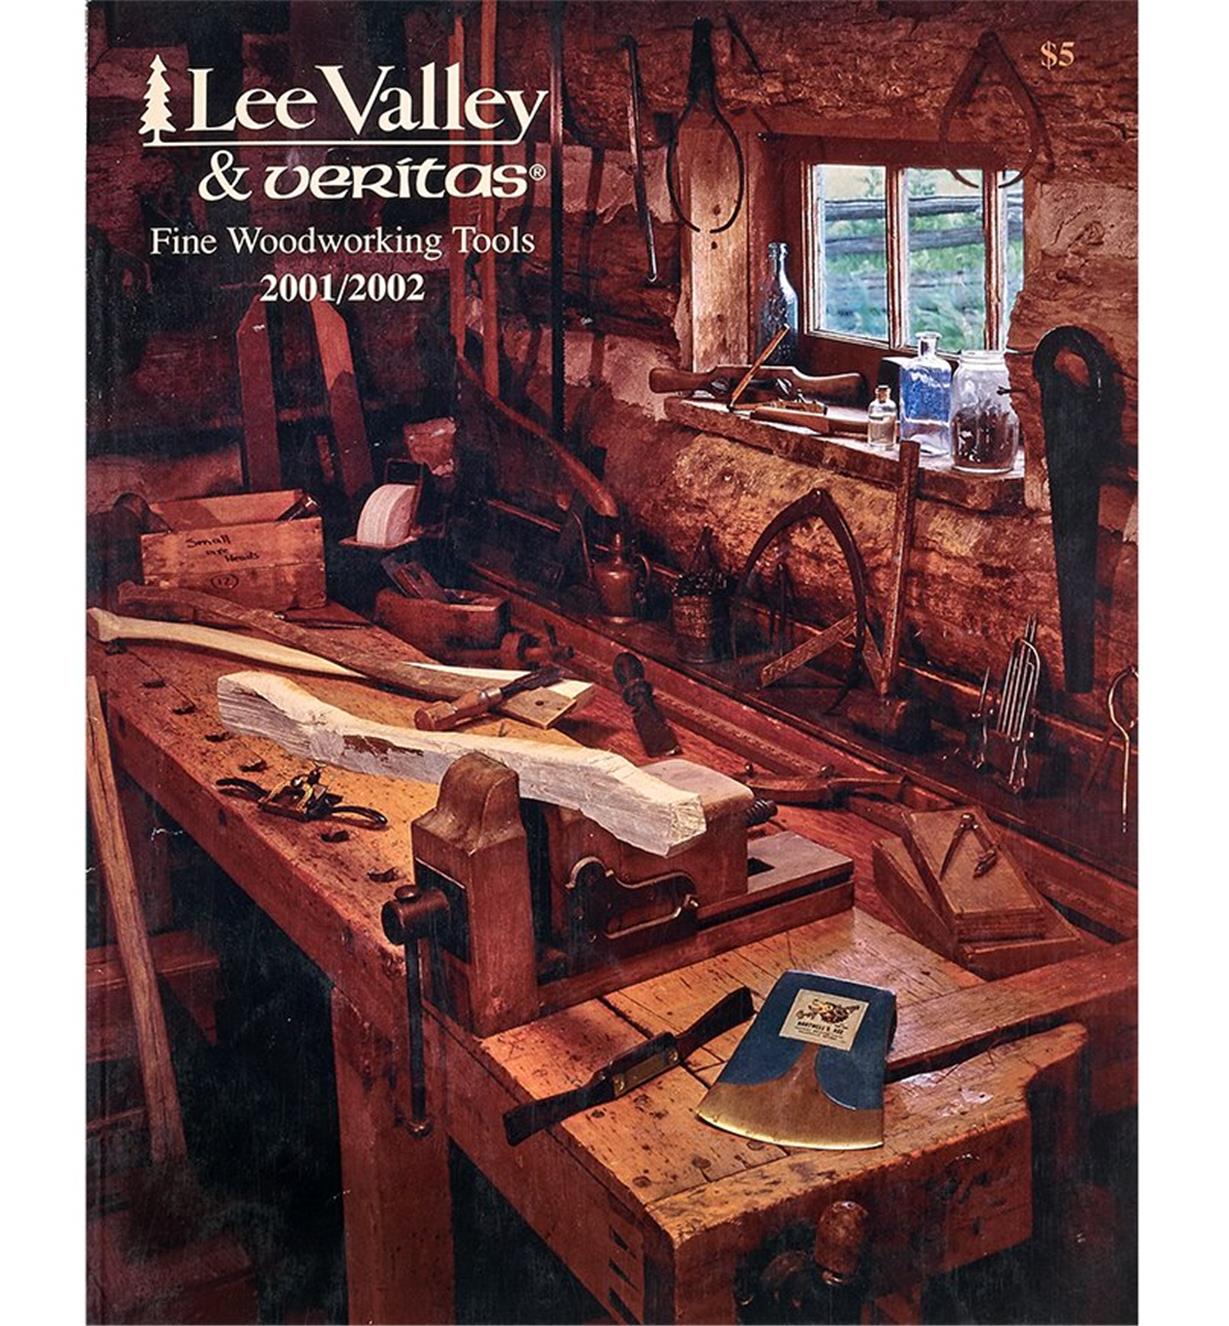 Fine Woodworking Tools 2001 2002 Customer Letter Lee Valley Tools